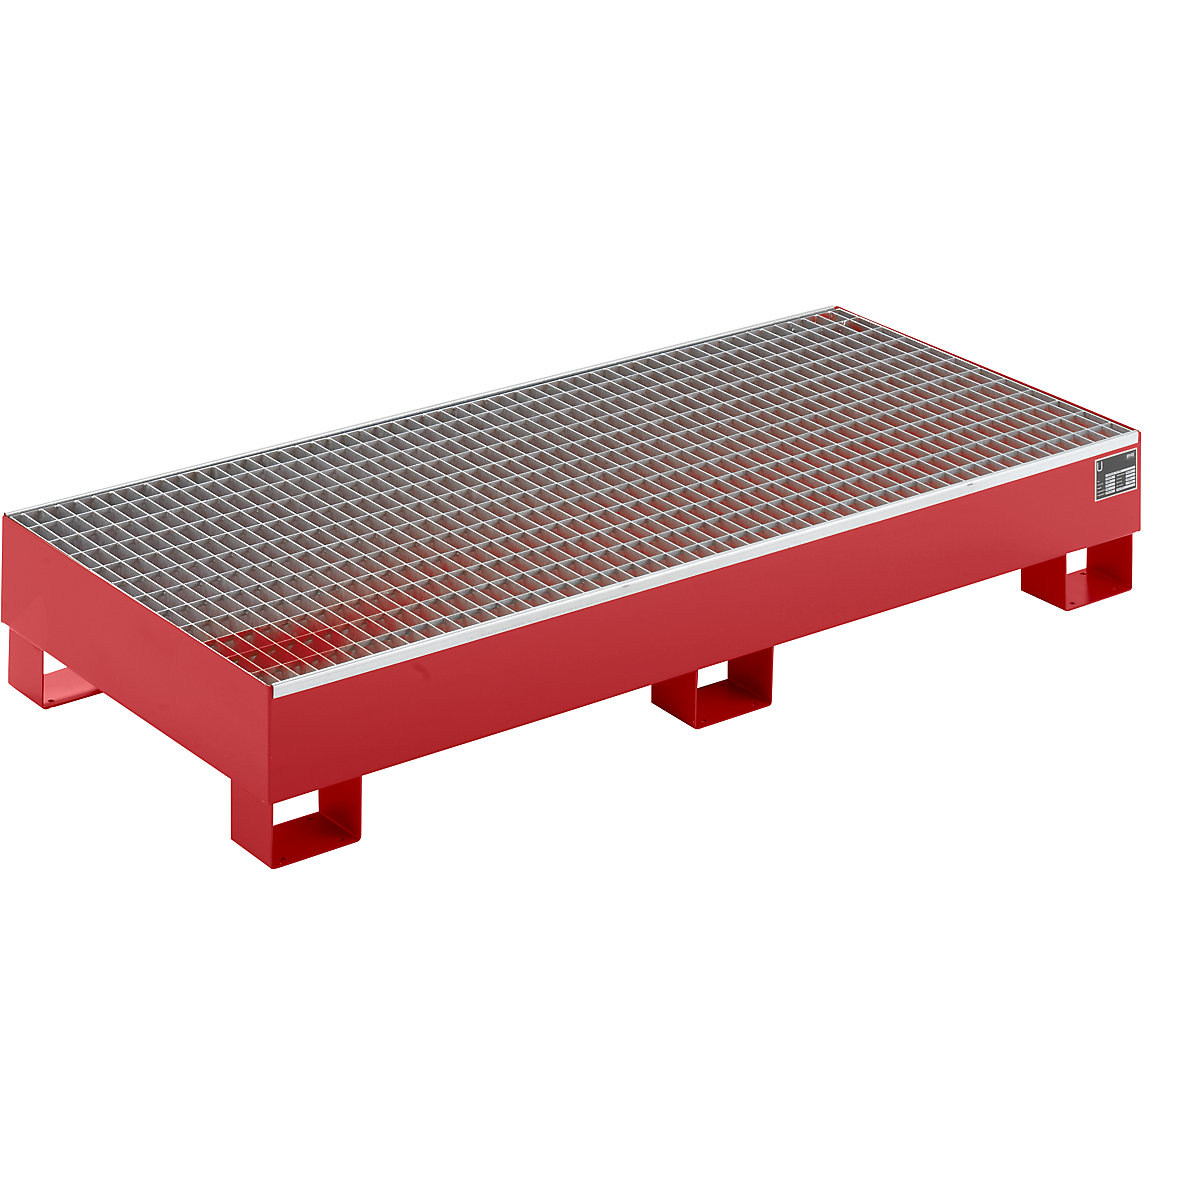 EUROKRAFTbasic – Sump tray made from sheet steel, LxWxH 1800 x 800 x 275 mm, red RAL 3000, with grate